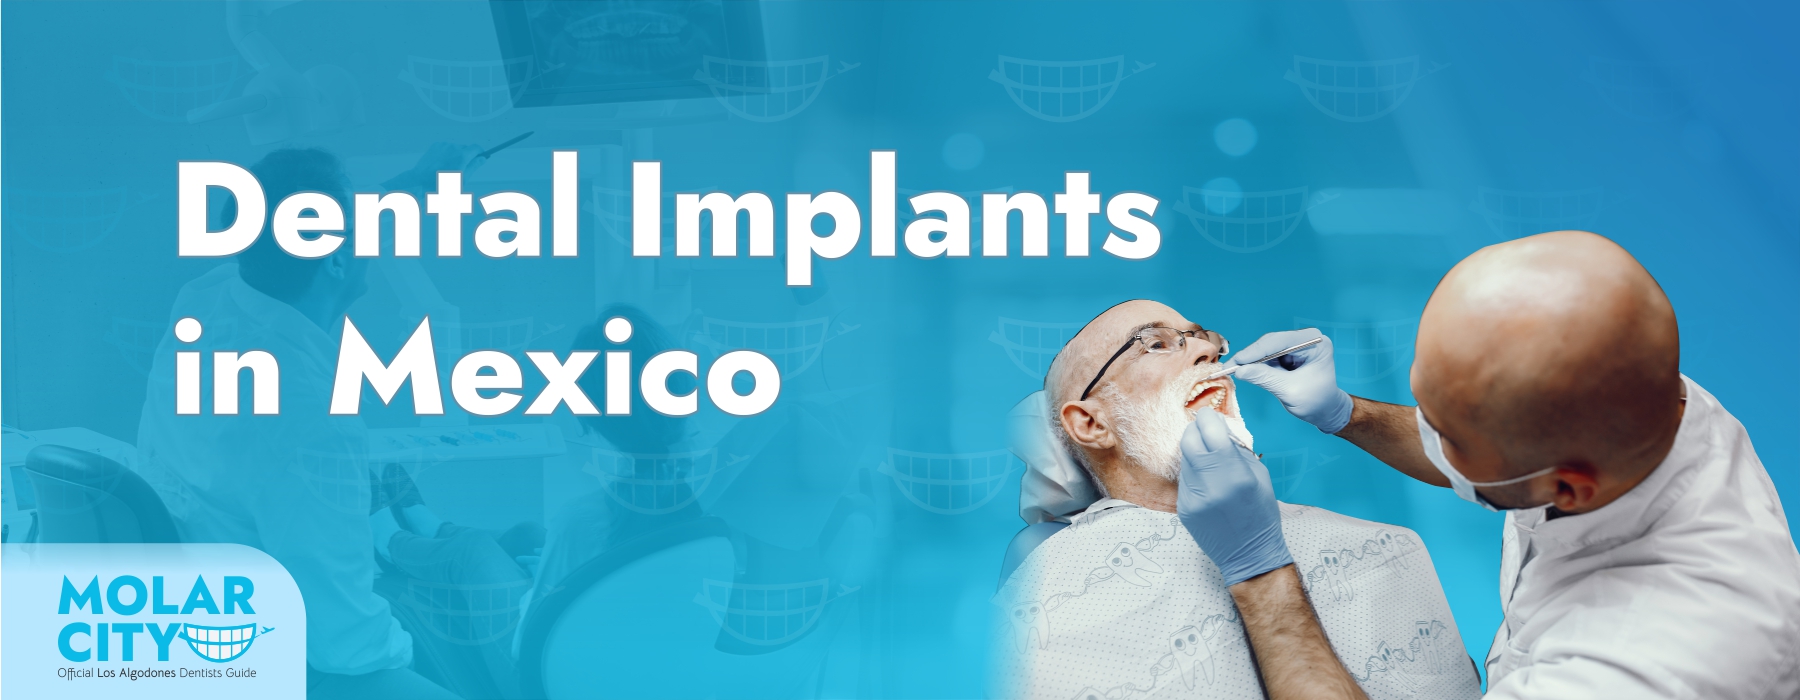 Dental Implants in Mexico: Why Los Algodones is Your Best Choice